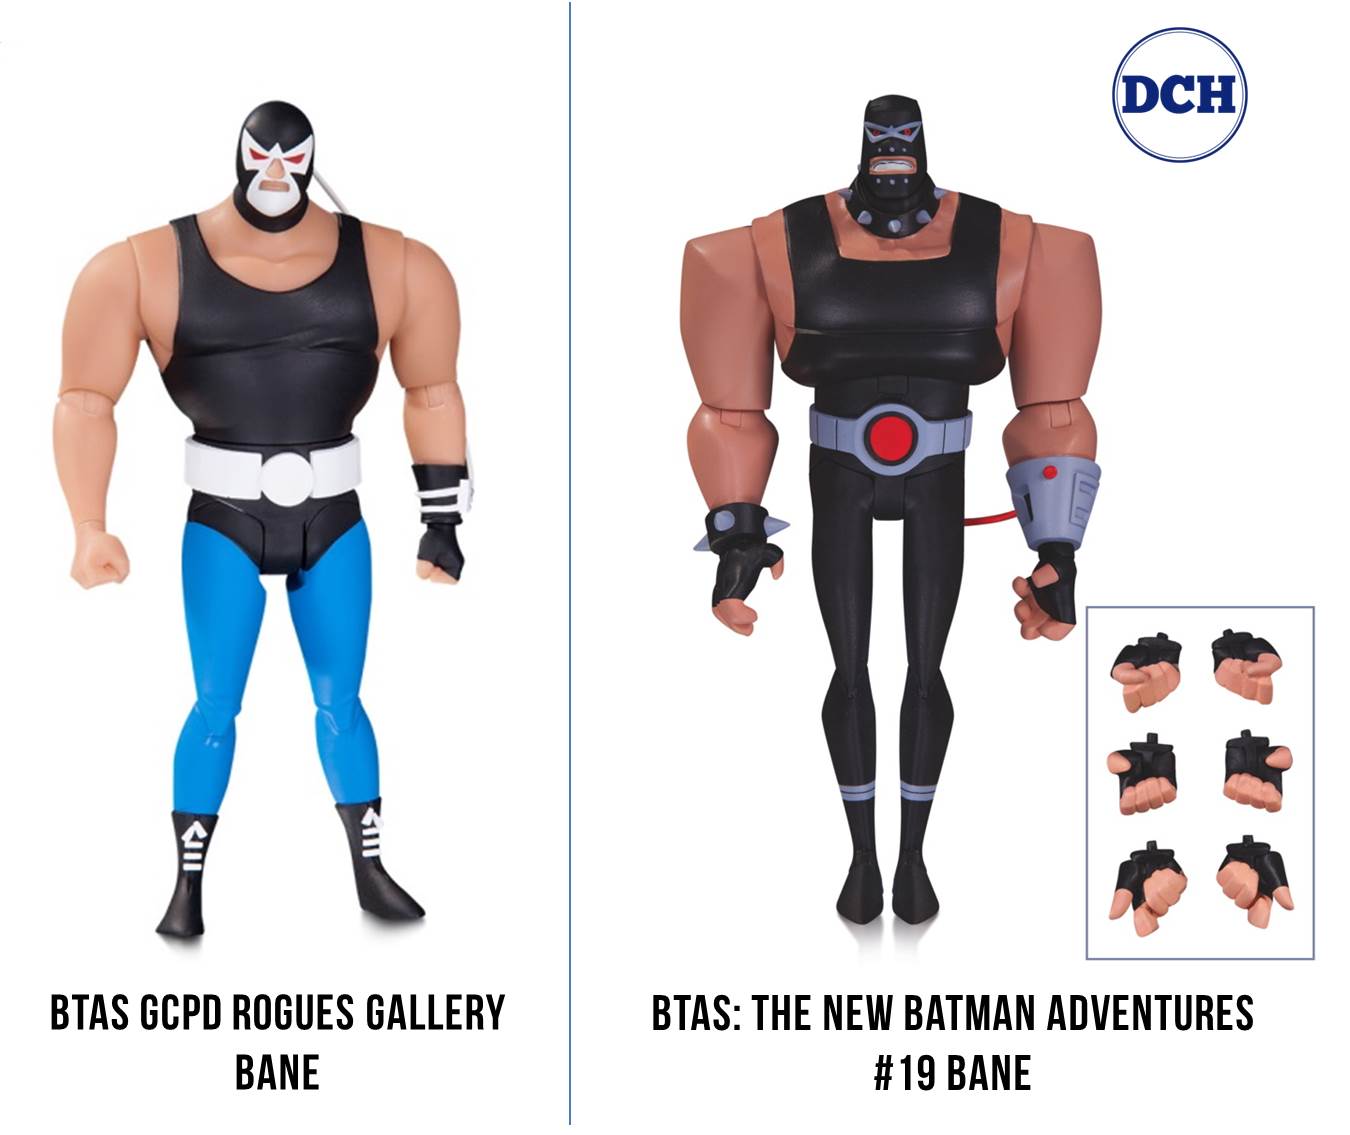 dc collectibles rogues gallery